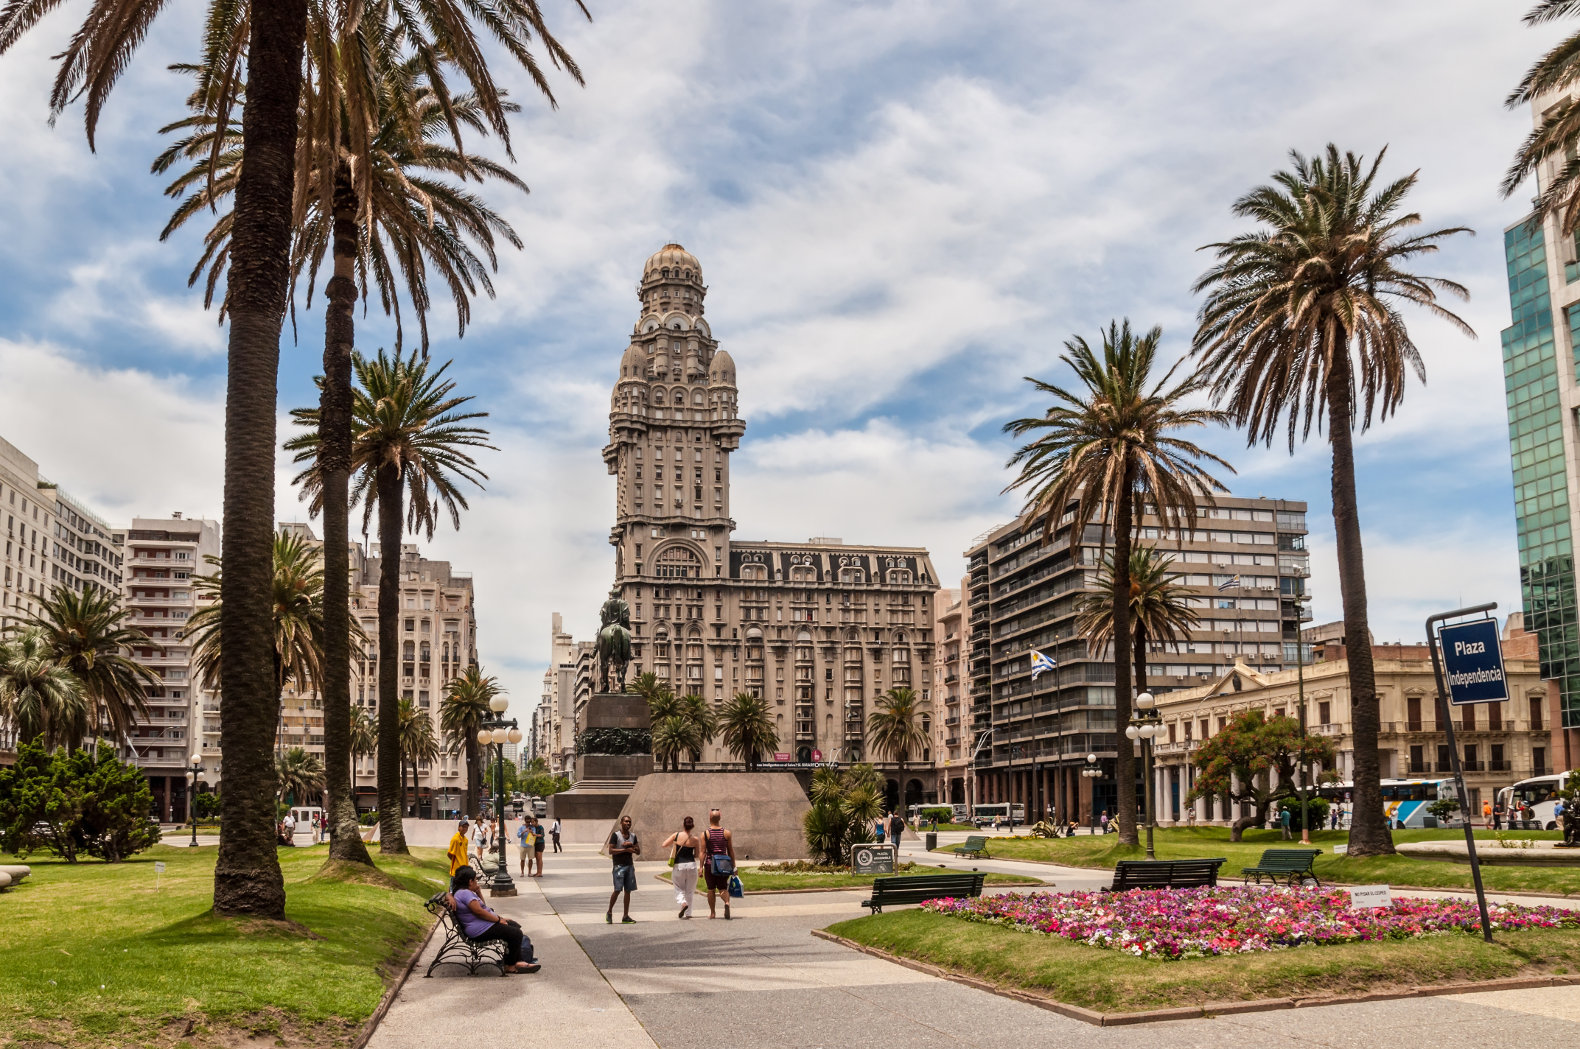 Montevideo central square. (Photo internet reproduction)